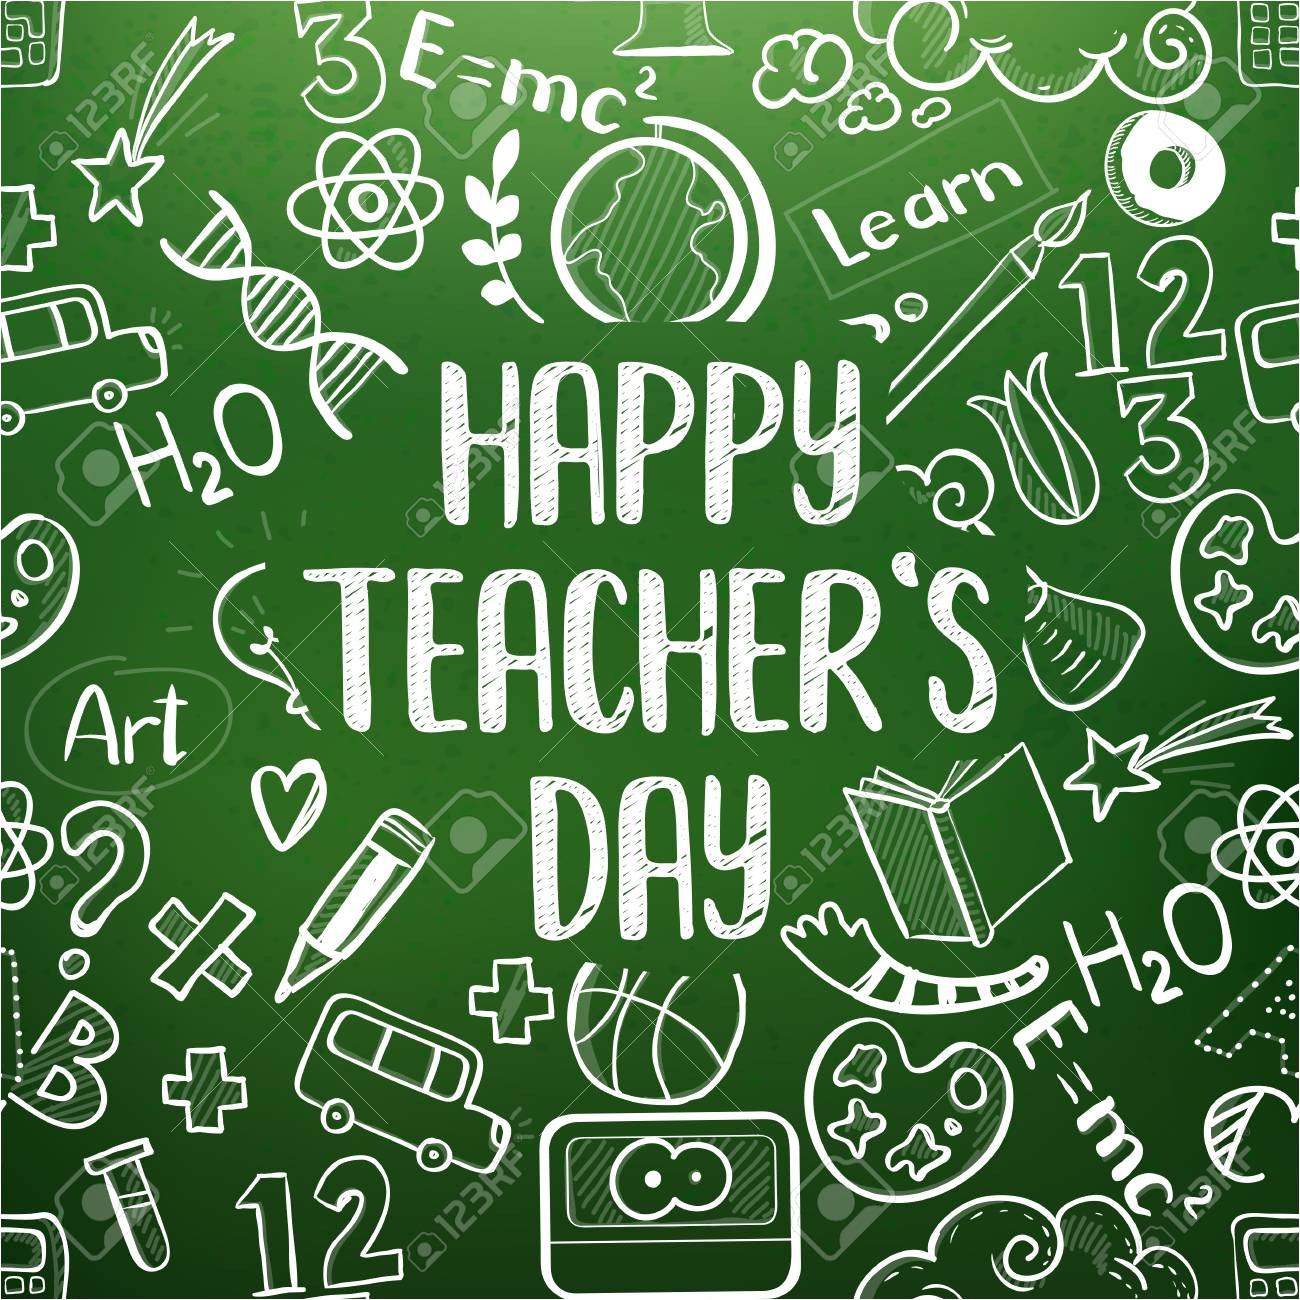 100315143 happy teacher s day greeting on school realistic green chalkboard doodle icons frame jpg